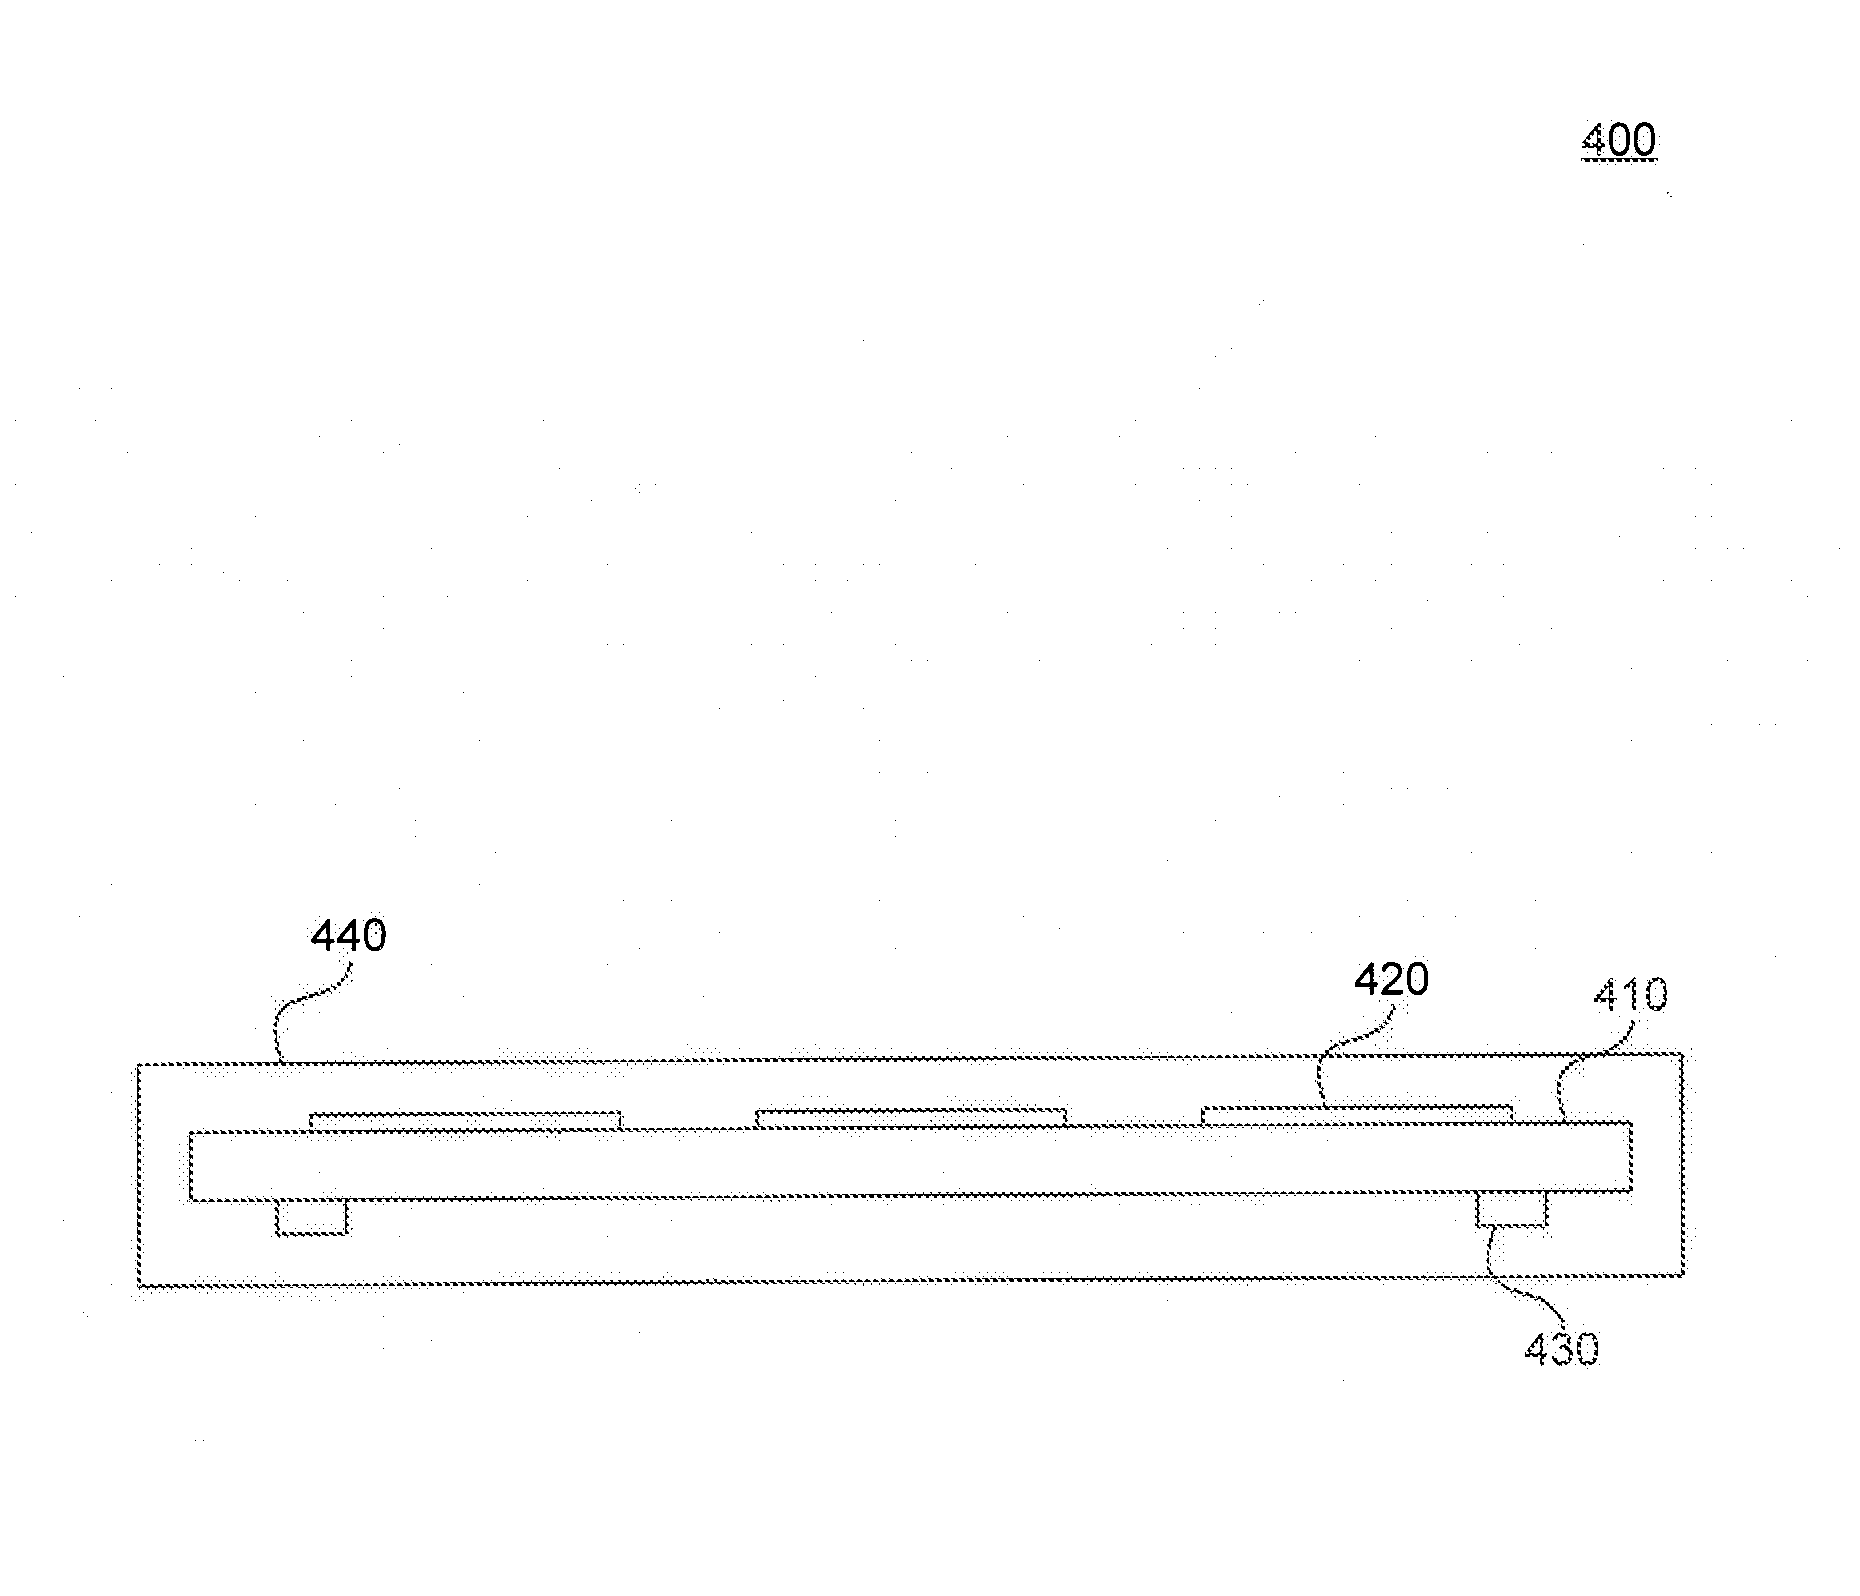 Power Transmitting Device Having Power Theft Detection and Prevention